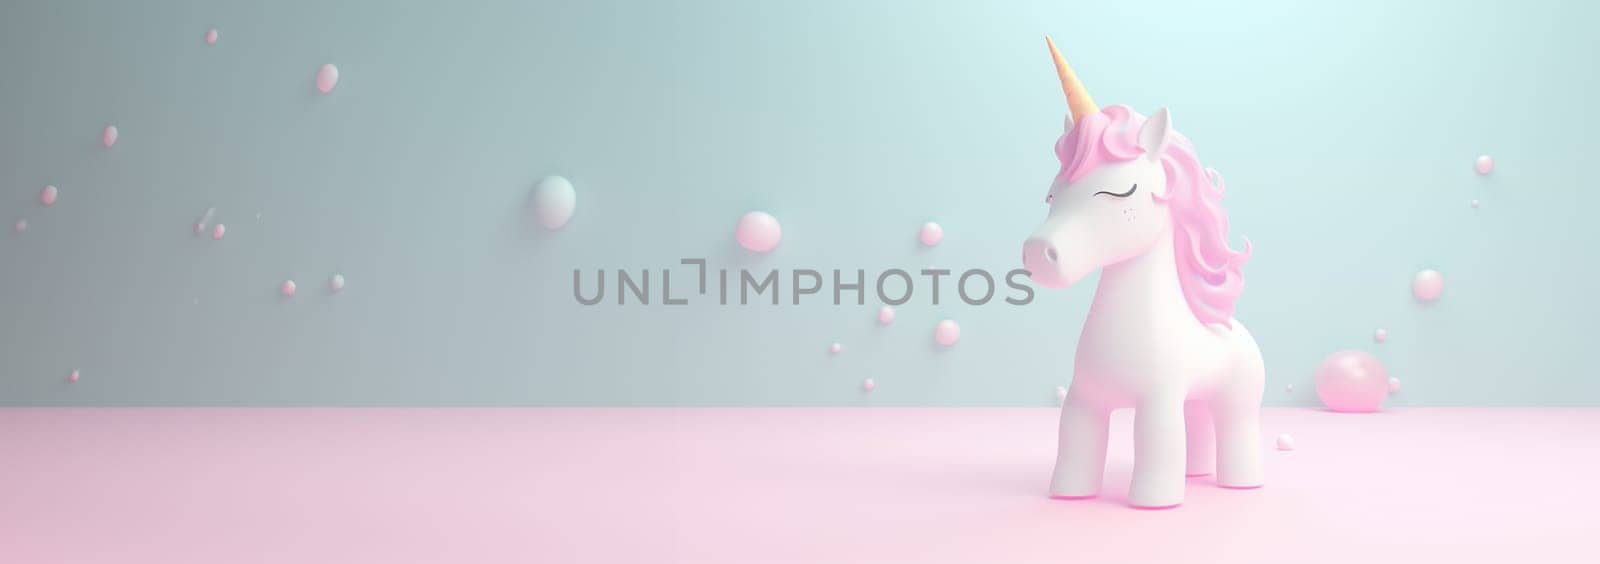 Cute unicorn pastel colored background. Magic fairy tale character unicorn 3d illustration for girls. Magic fairy tale unicorn print for clothes, stationery, books, goods. Toy Unicorn 3D character banner, background. Copy space Space for text web banner